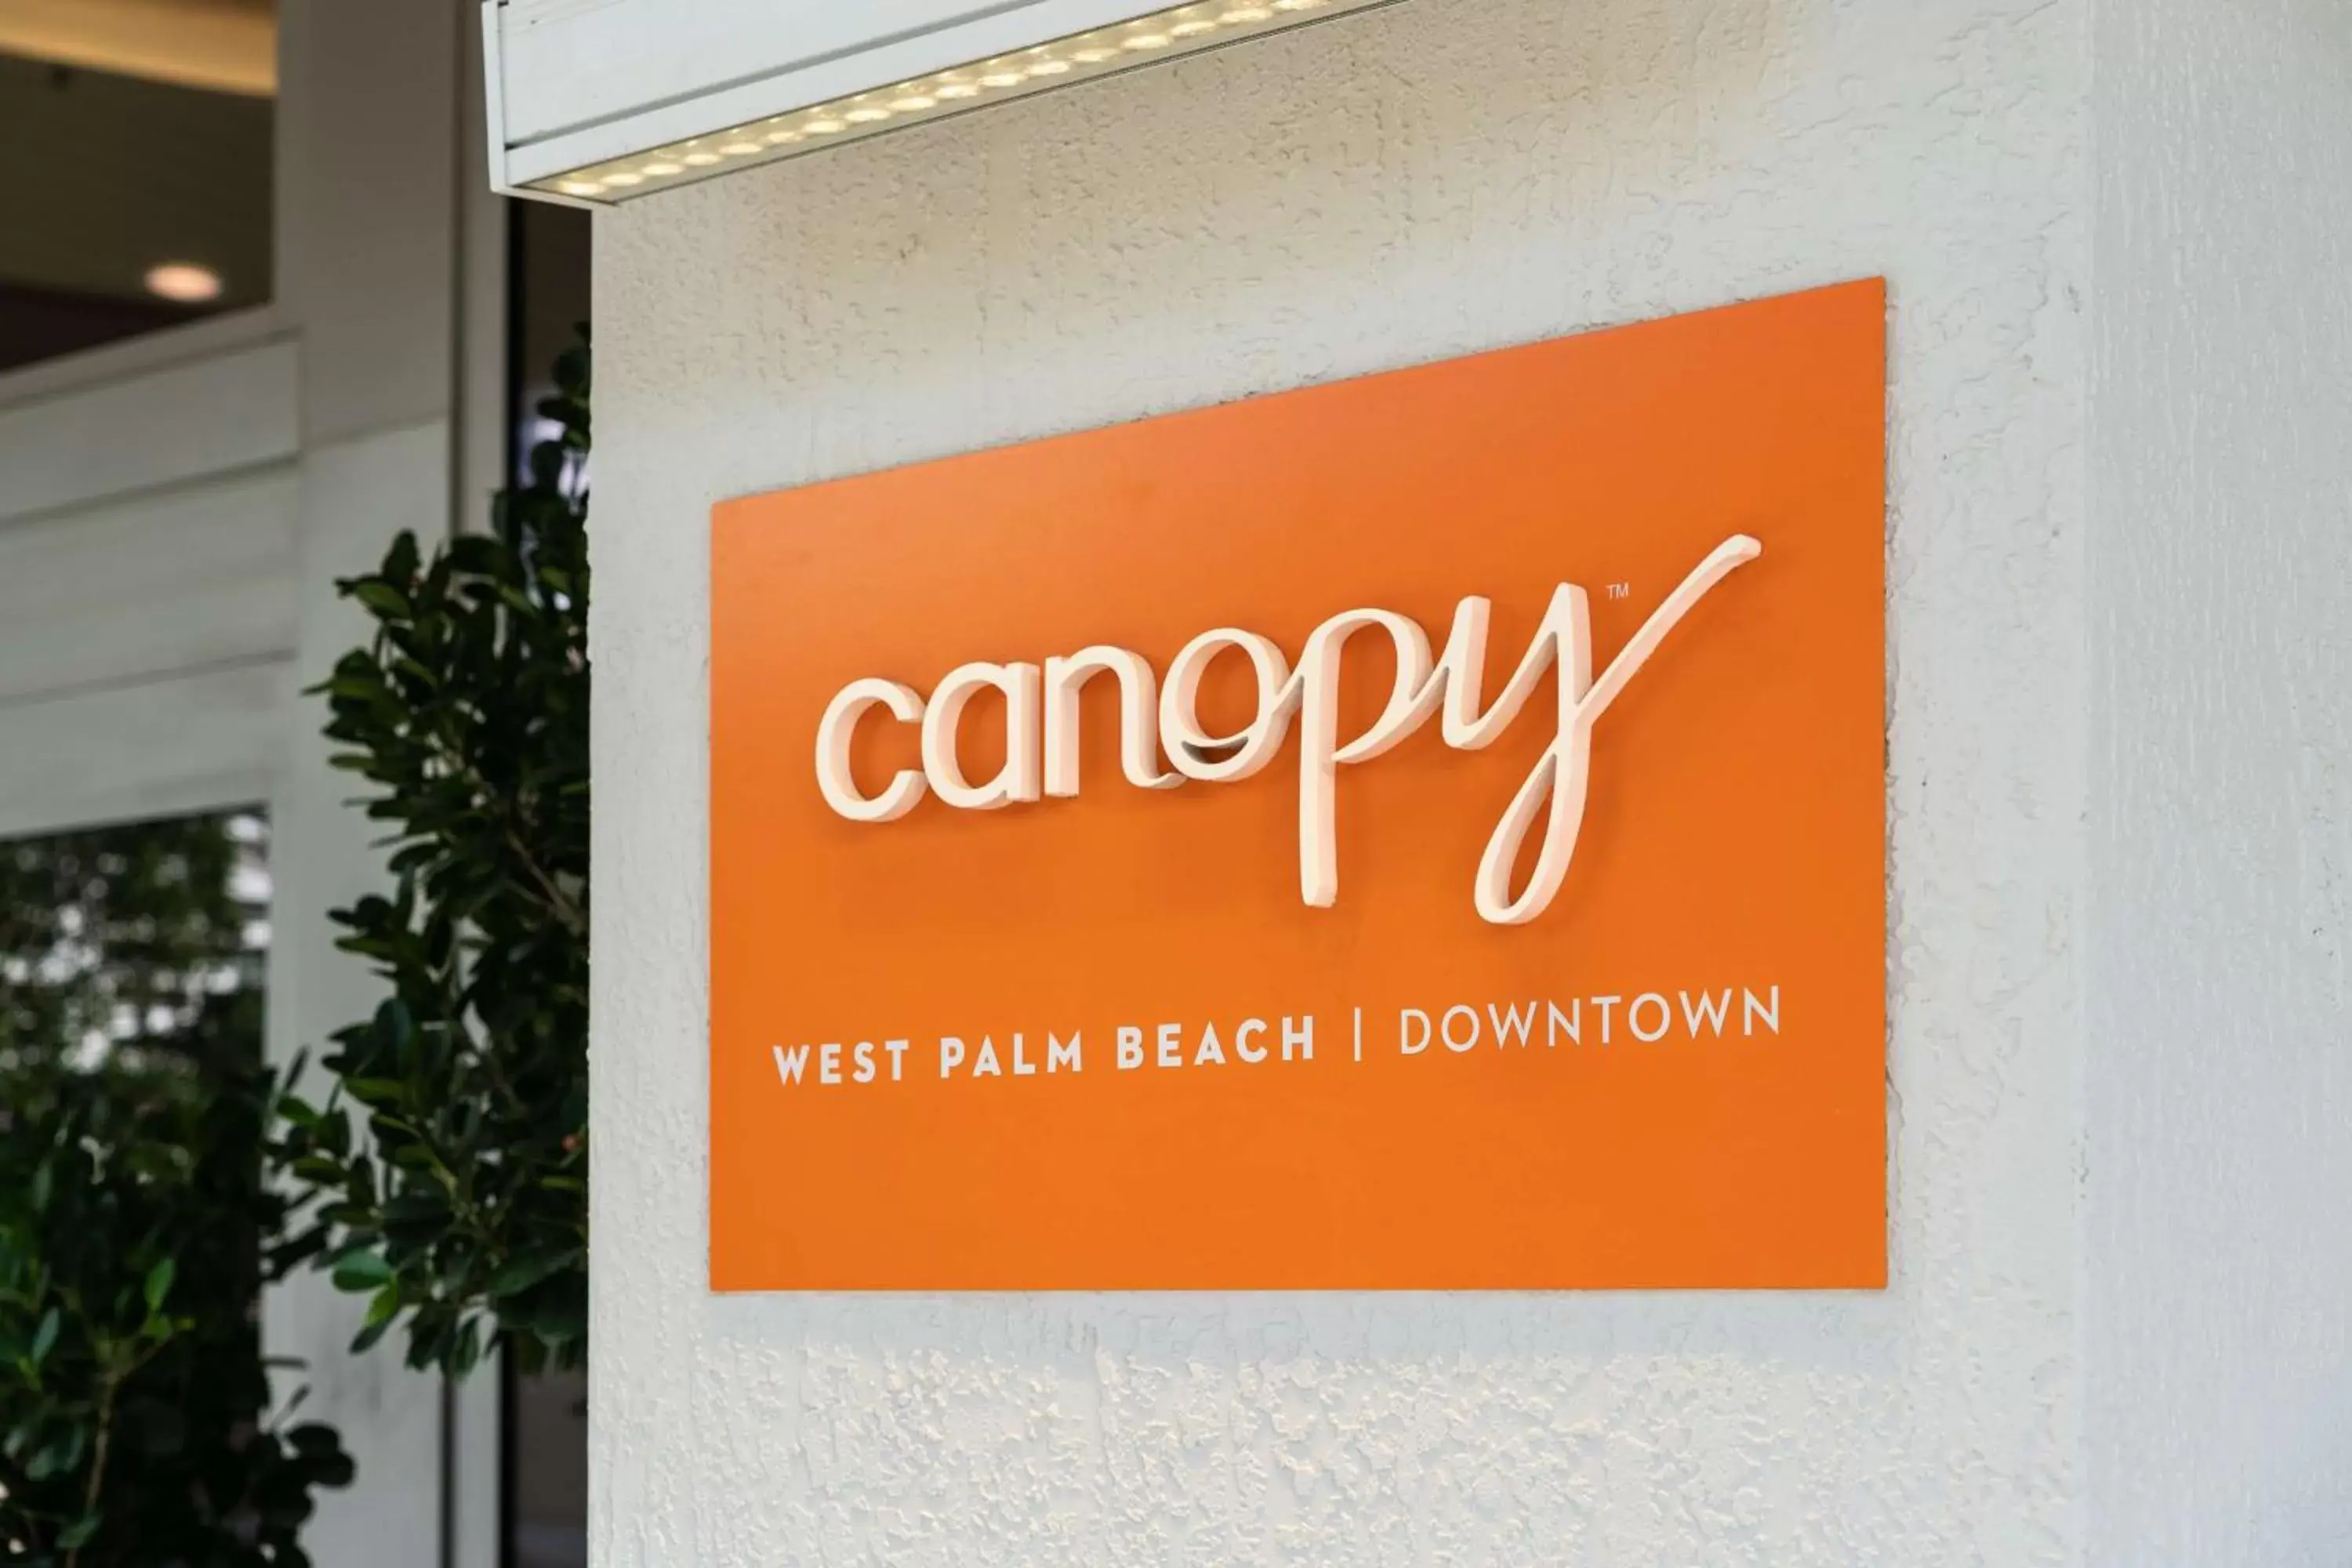 Property building in Canopy West Palm Beach - Downtown